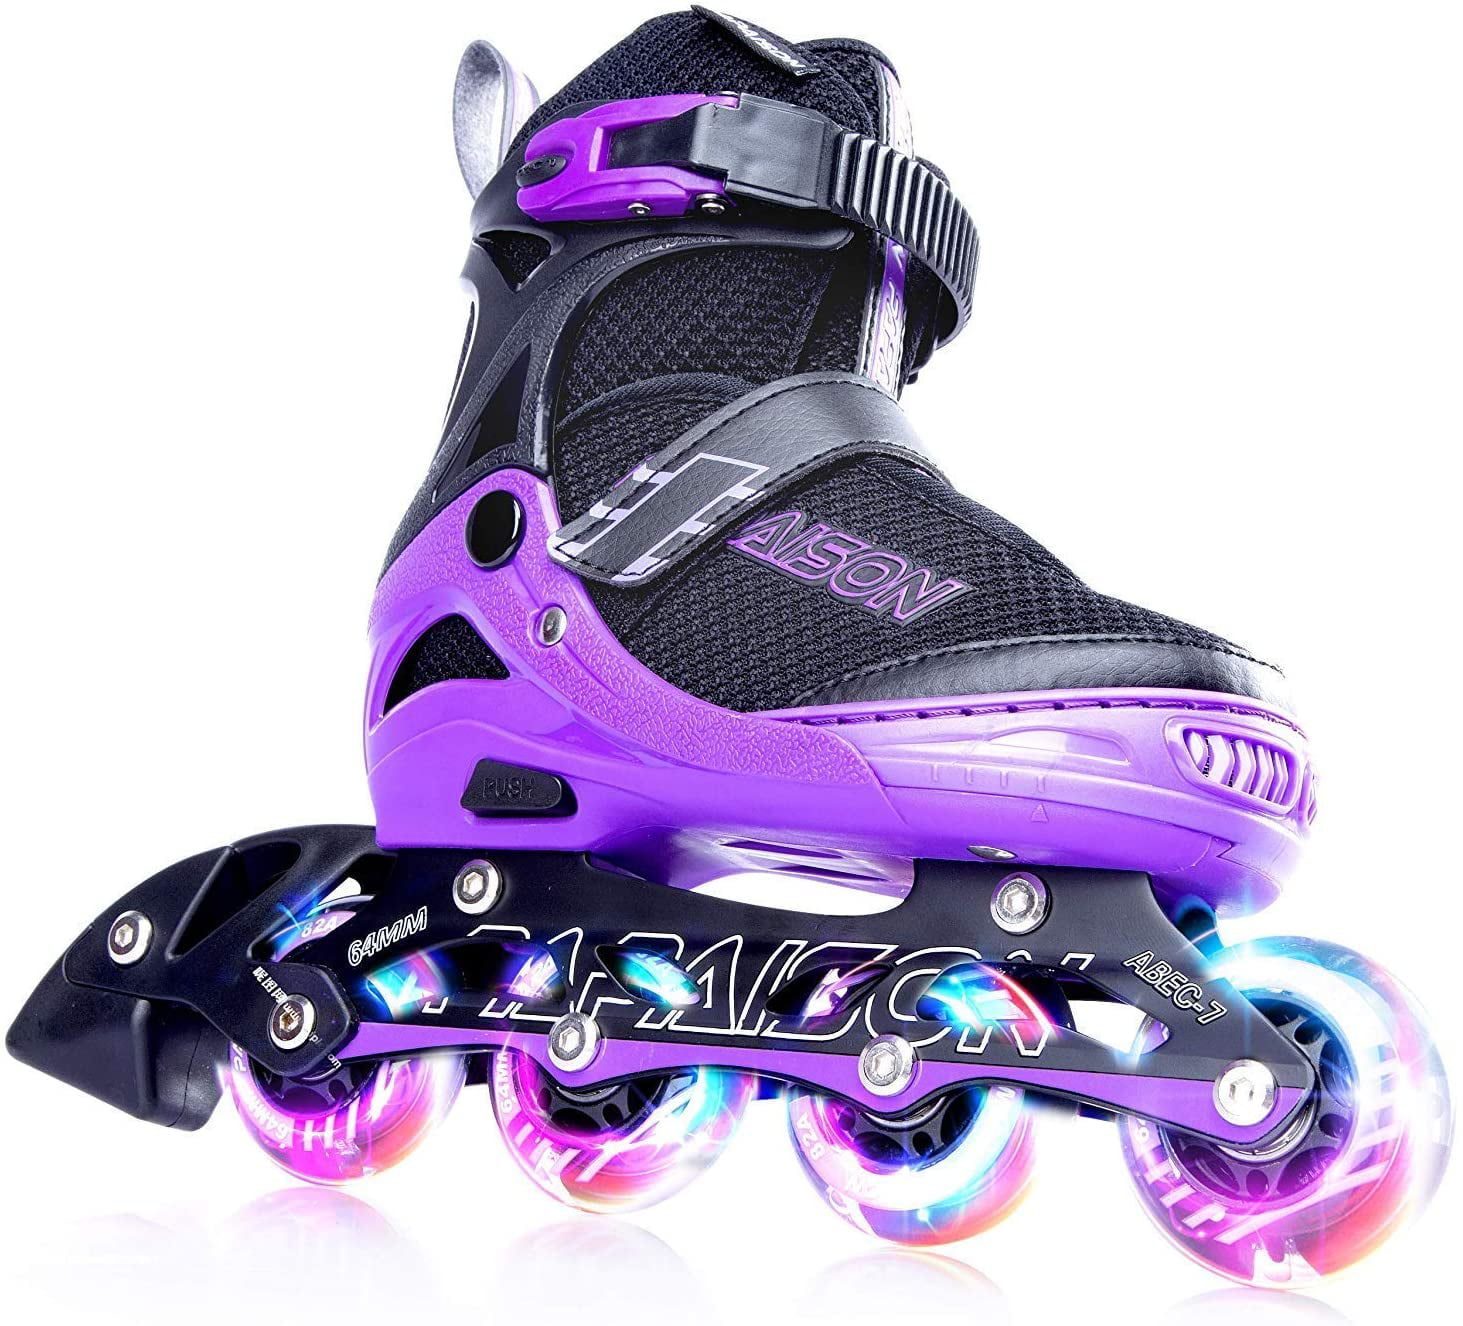 Professional Outdoor Indoor Quad-Skates for Kids & Adults… PAPAISON Roller Skates for Women and Men Deluxe 2 Layer Microfiber Leather Double Row-Classic Roller Skates for Girls 